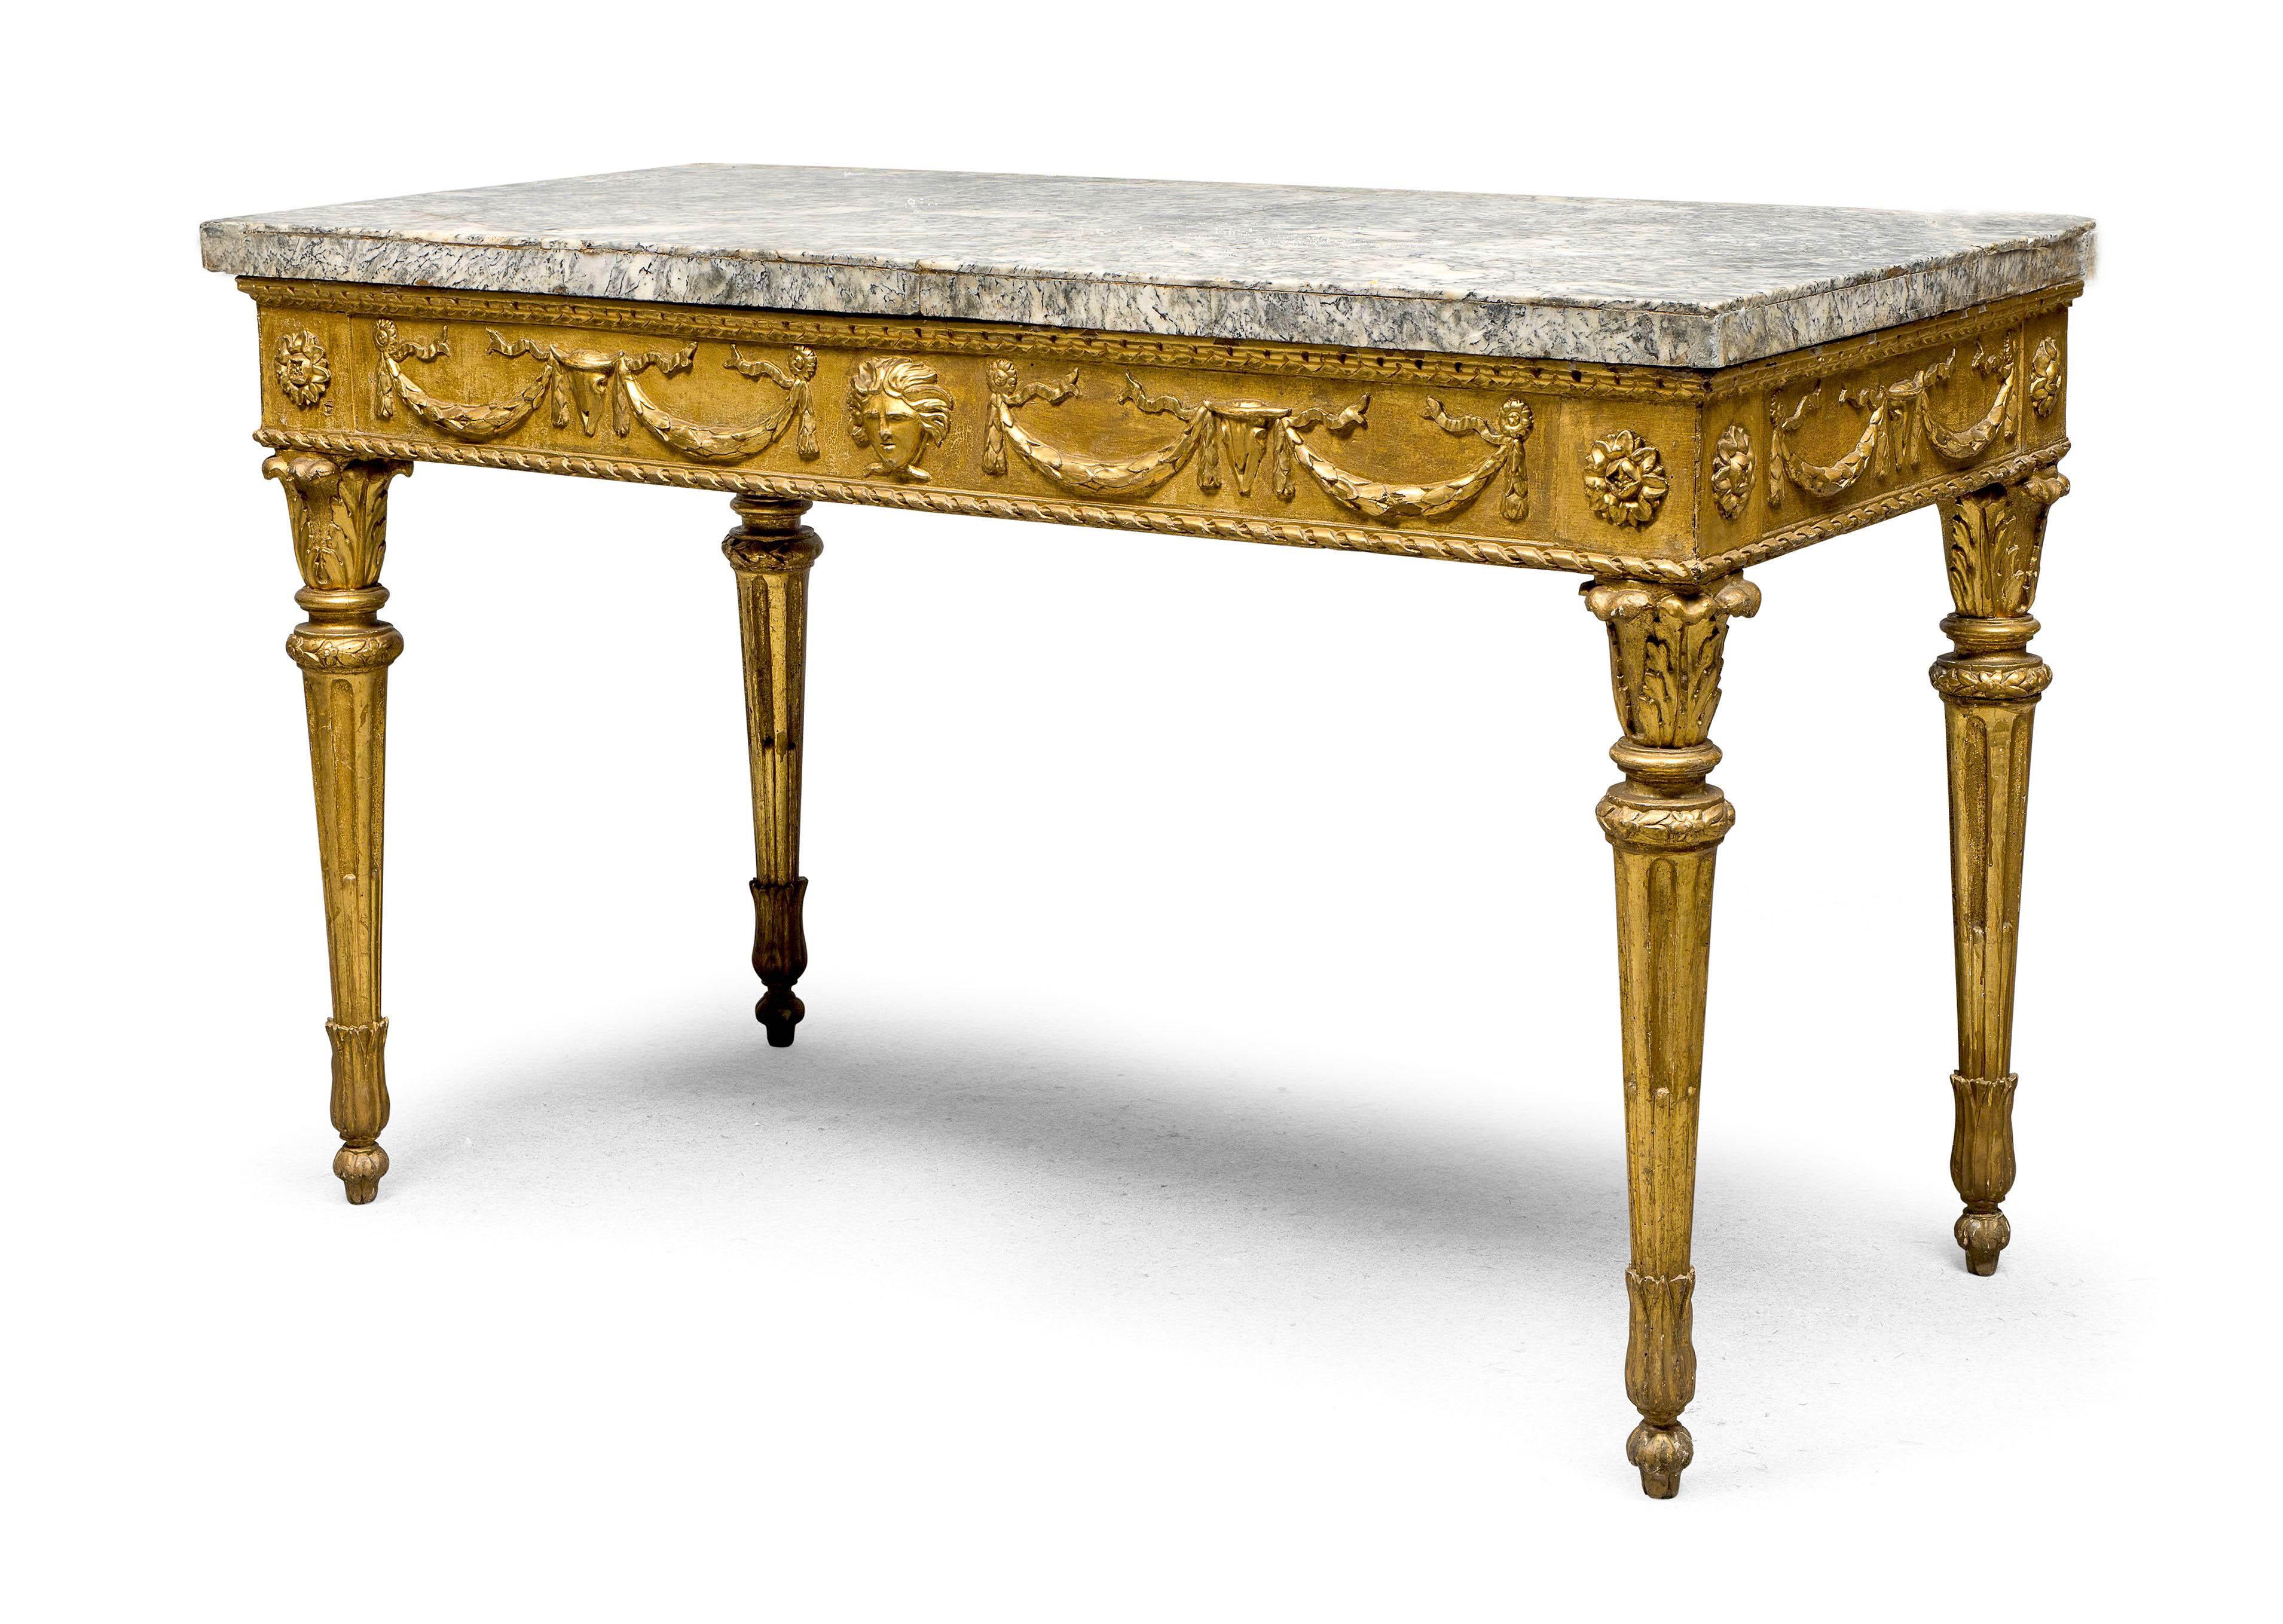 A very fine Italian carved gilt-wood console tables, Roma, circa 1770
With an important and very rare rectangular 